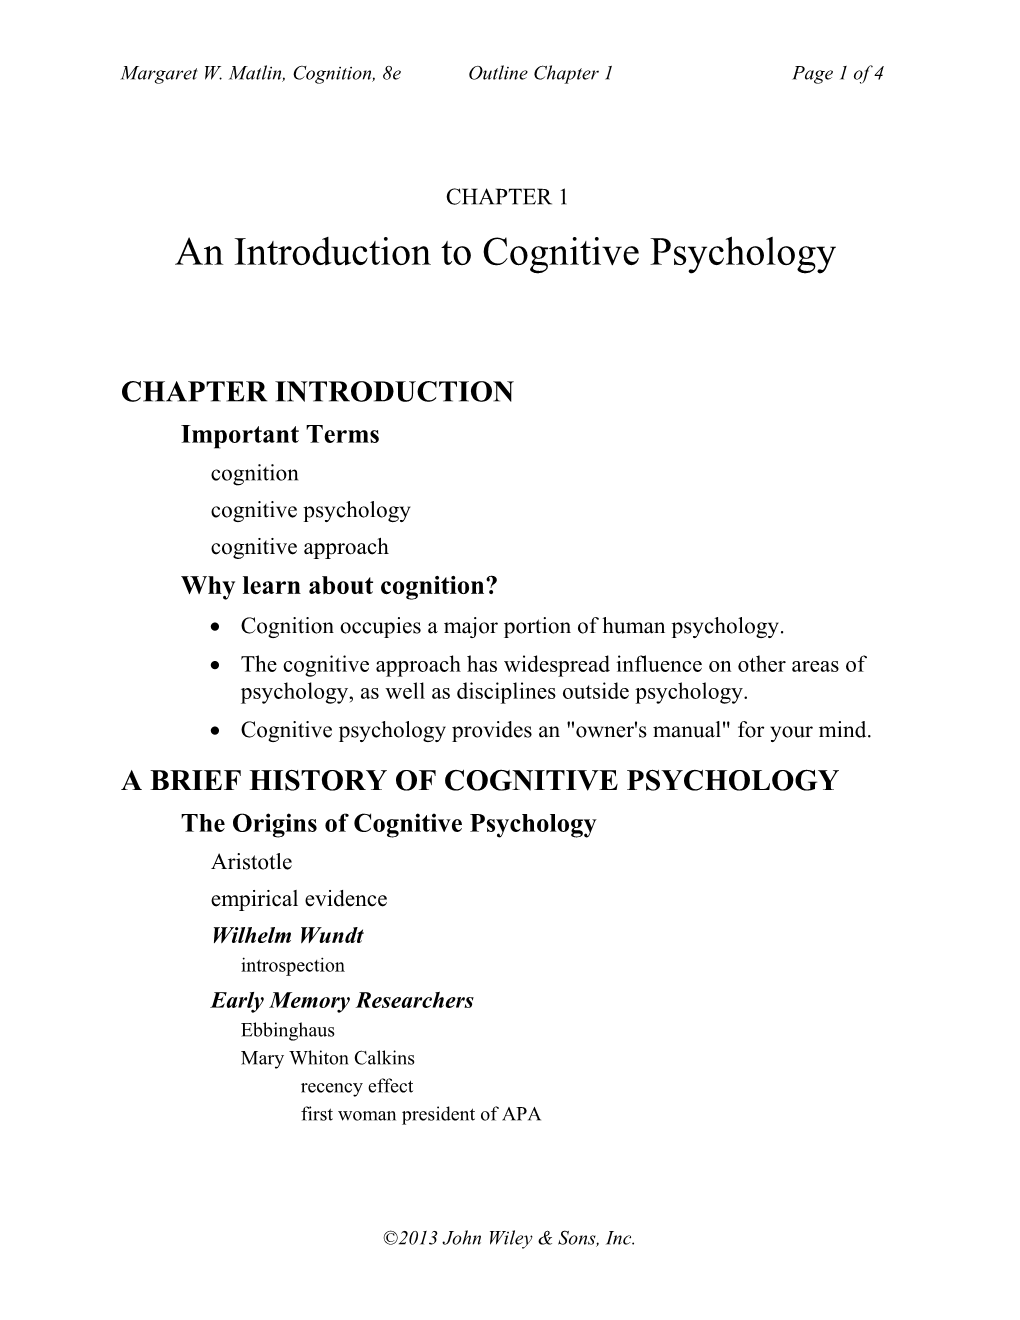 Margaret W. Matlin, Cognition, 8Eoutline Chapter 1Page 1 of 2